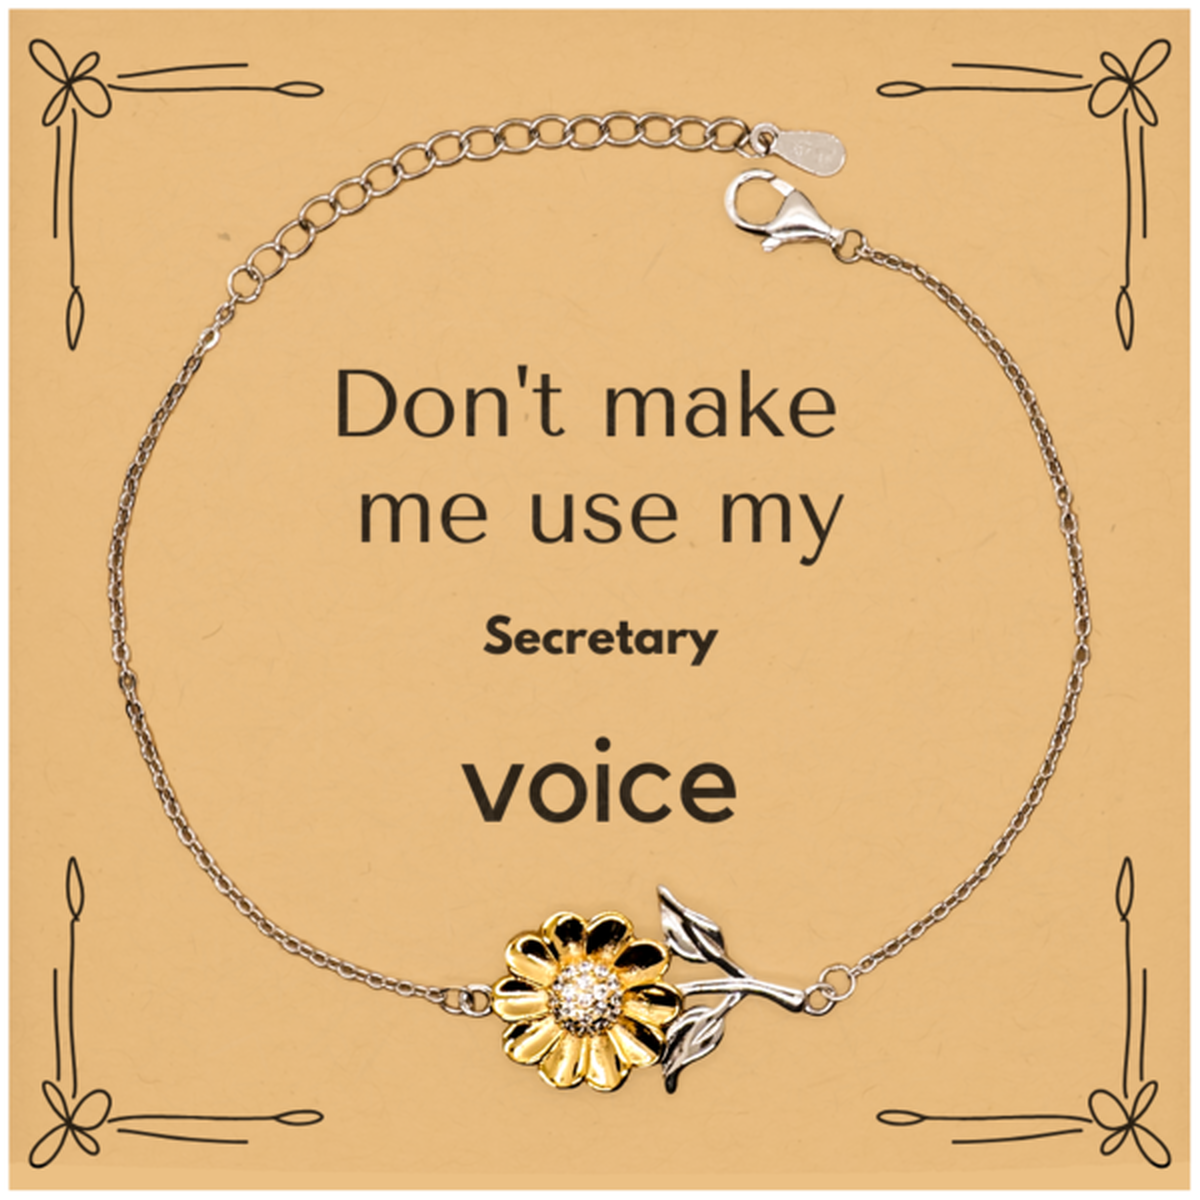 Don't make me use my Secretary voice, Sarcasm Secretary Card Gifts, Christmas Secretary Sunflower Bracelet Birthday Unique Gifts For Secretary Coworkers, Men, Women, Colleague, Friends